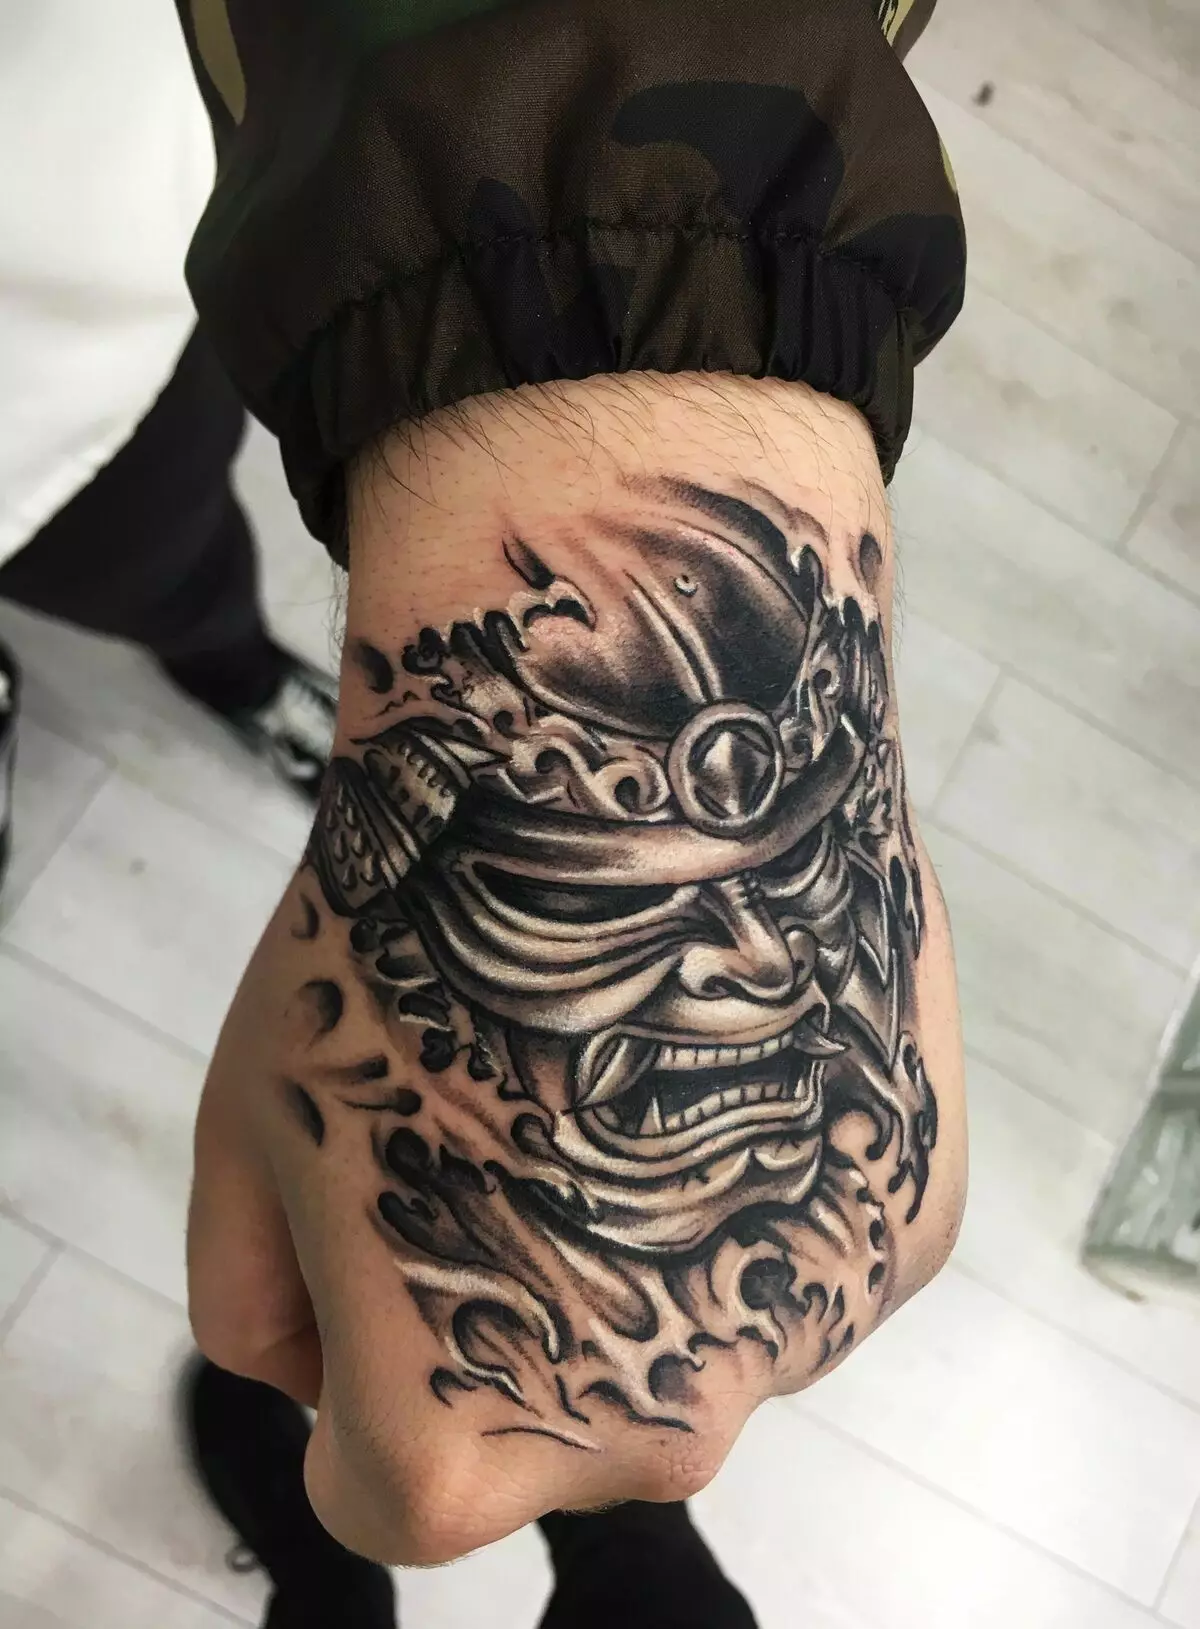 Tattoo in the form of Japanese masks: demons and their meanings. Sketches of tattoos in the style of Japan masks. Tattoo 